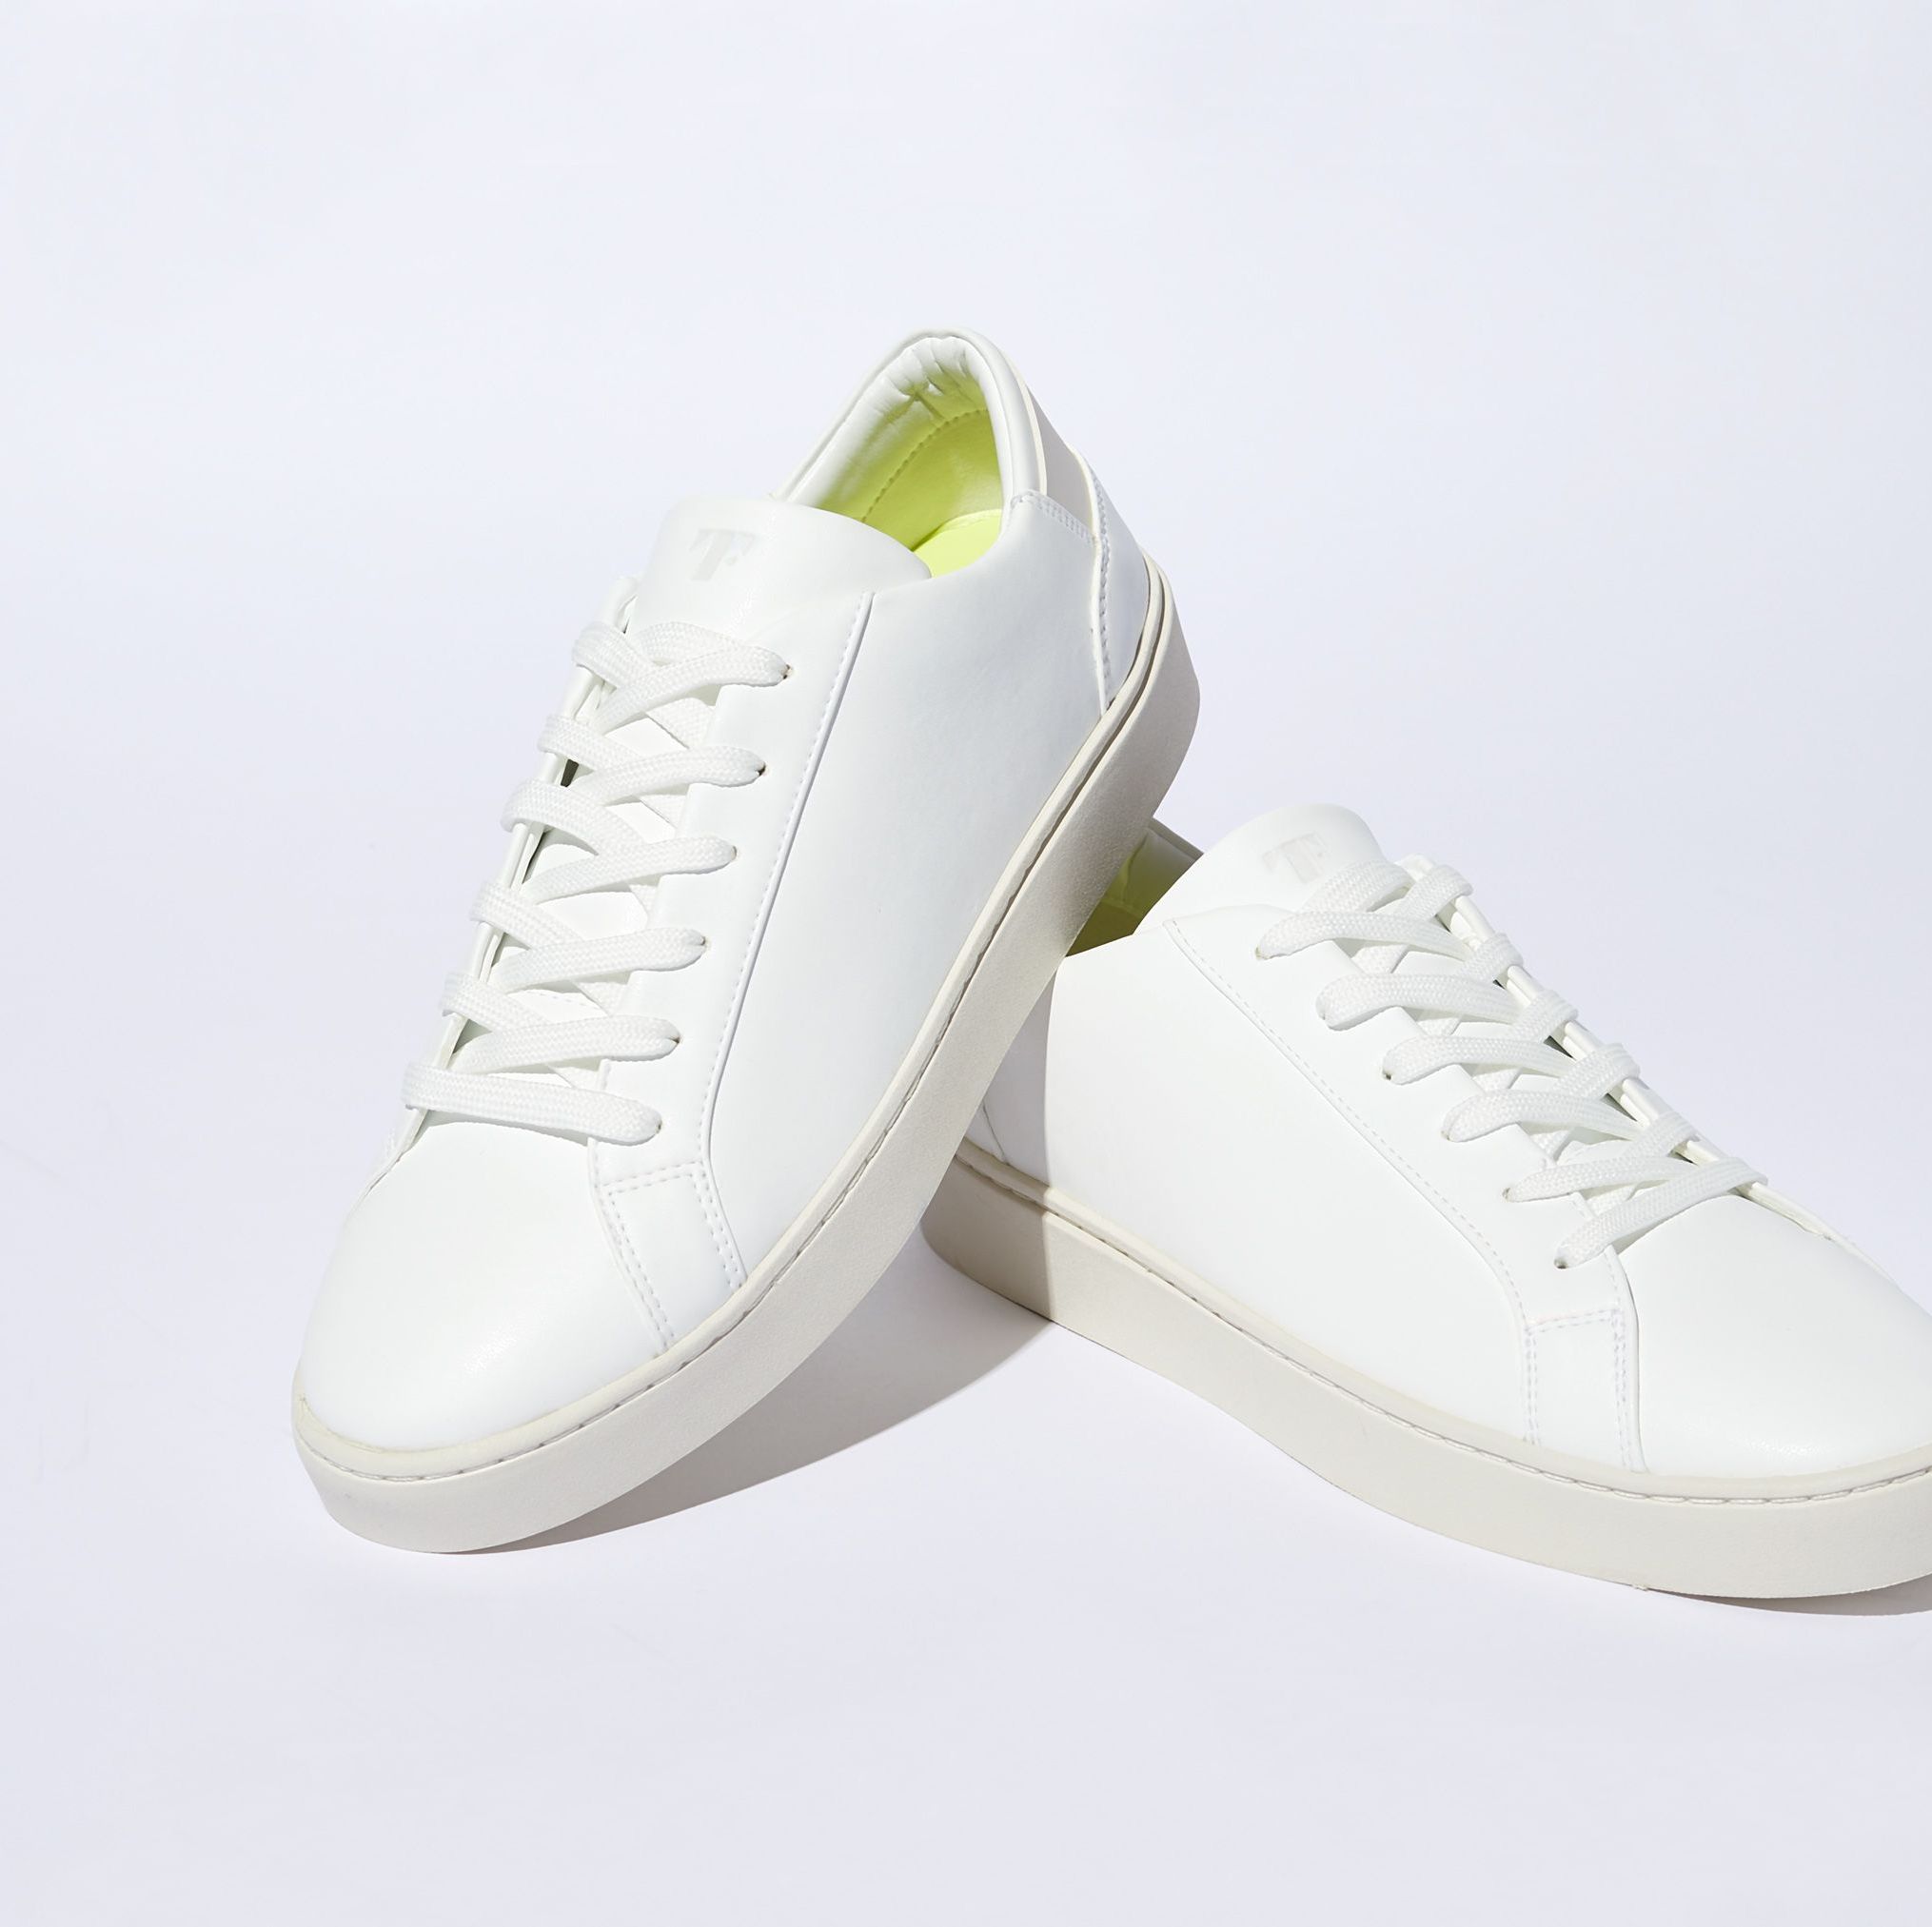 Thousand Fell's White Sneakers Are the Shoes of the Future